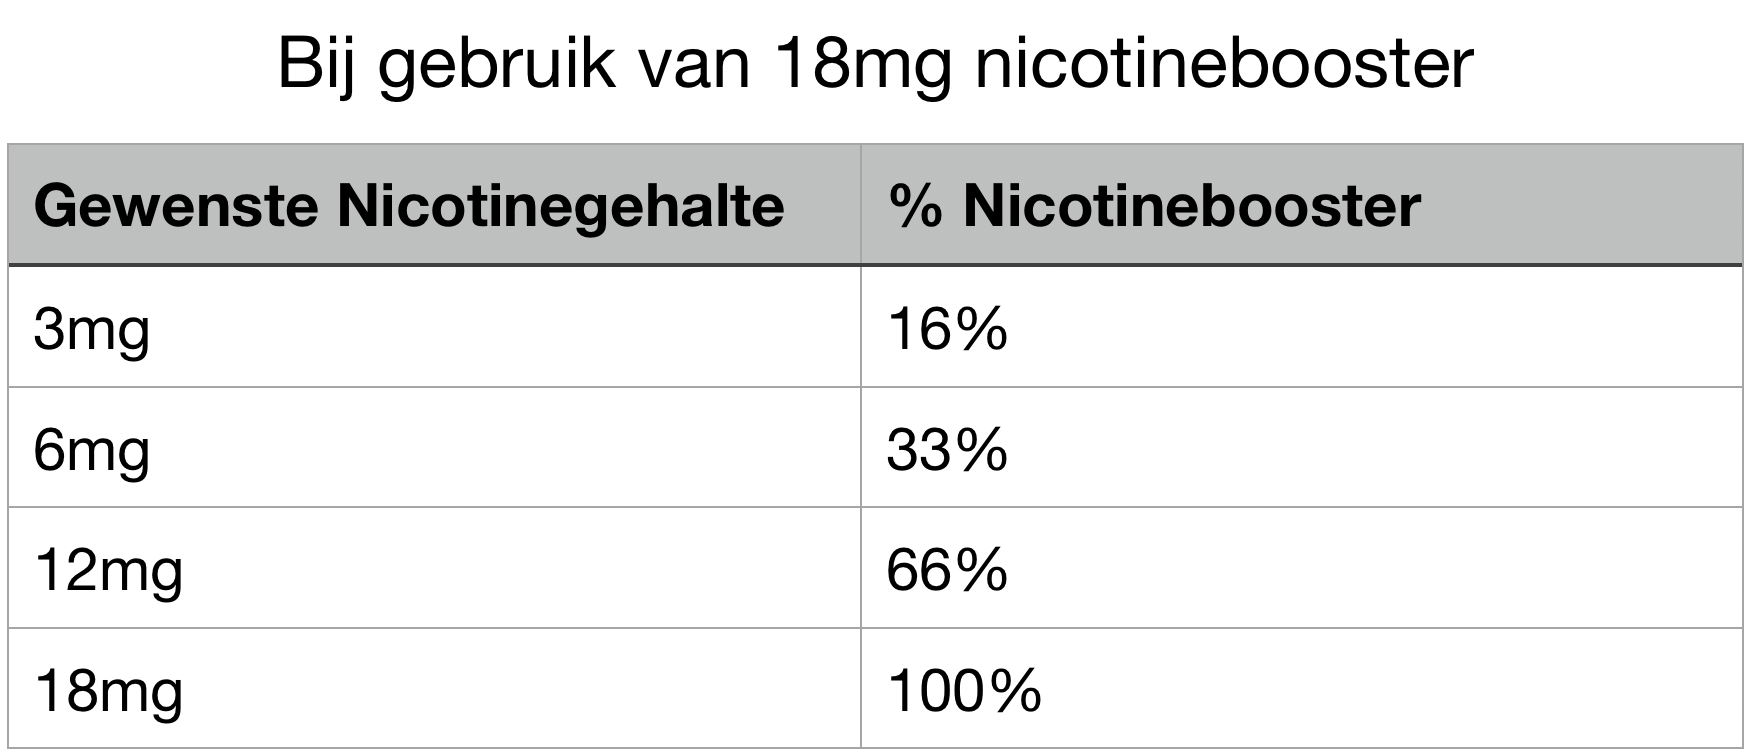 Tabel 18mg nicotinebooster